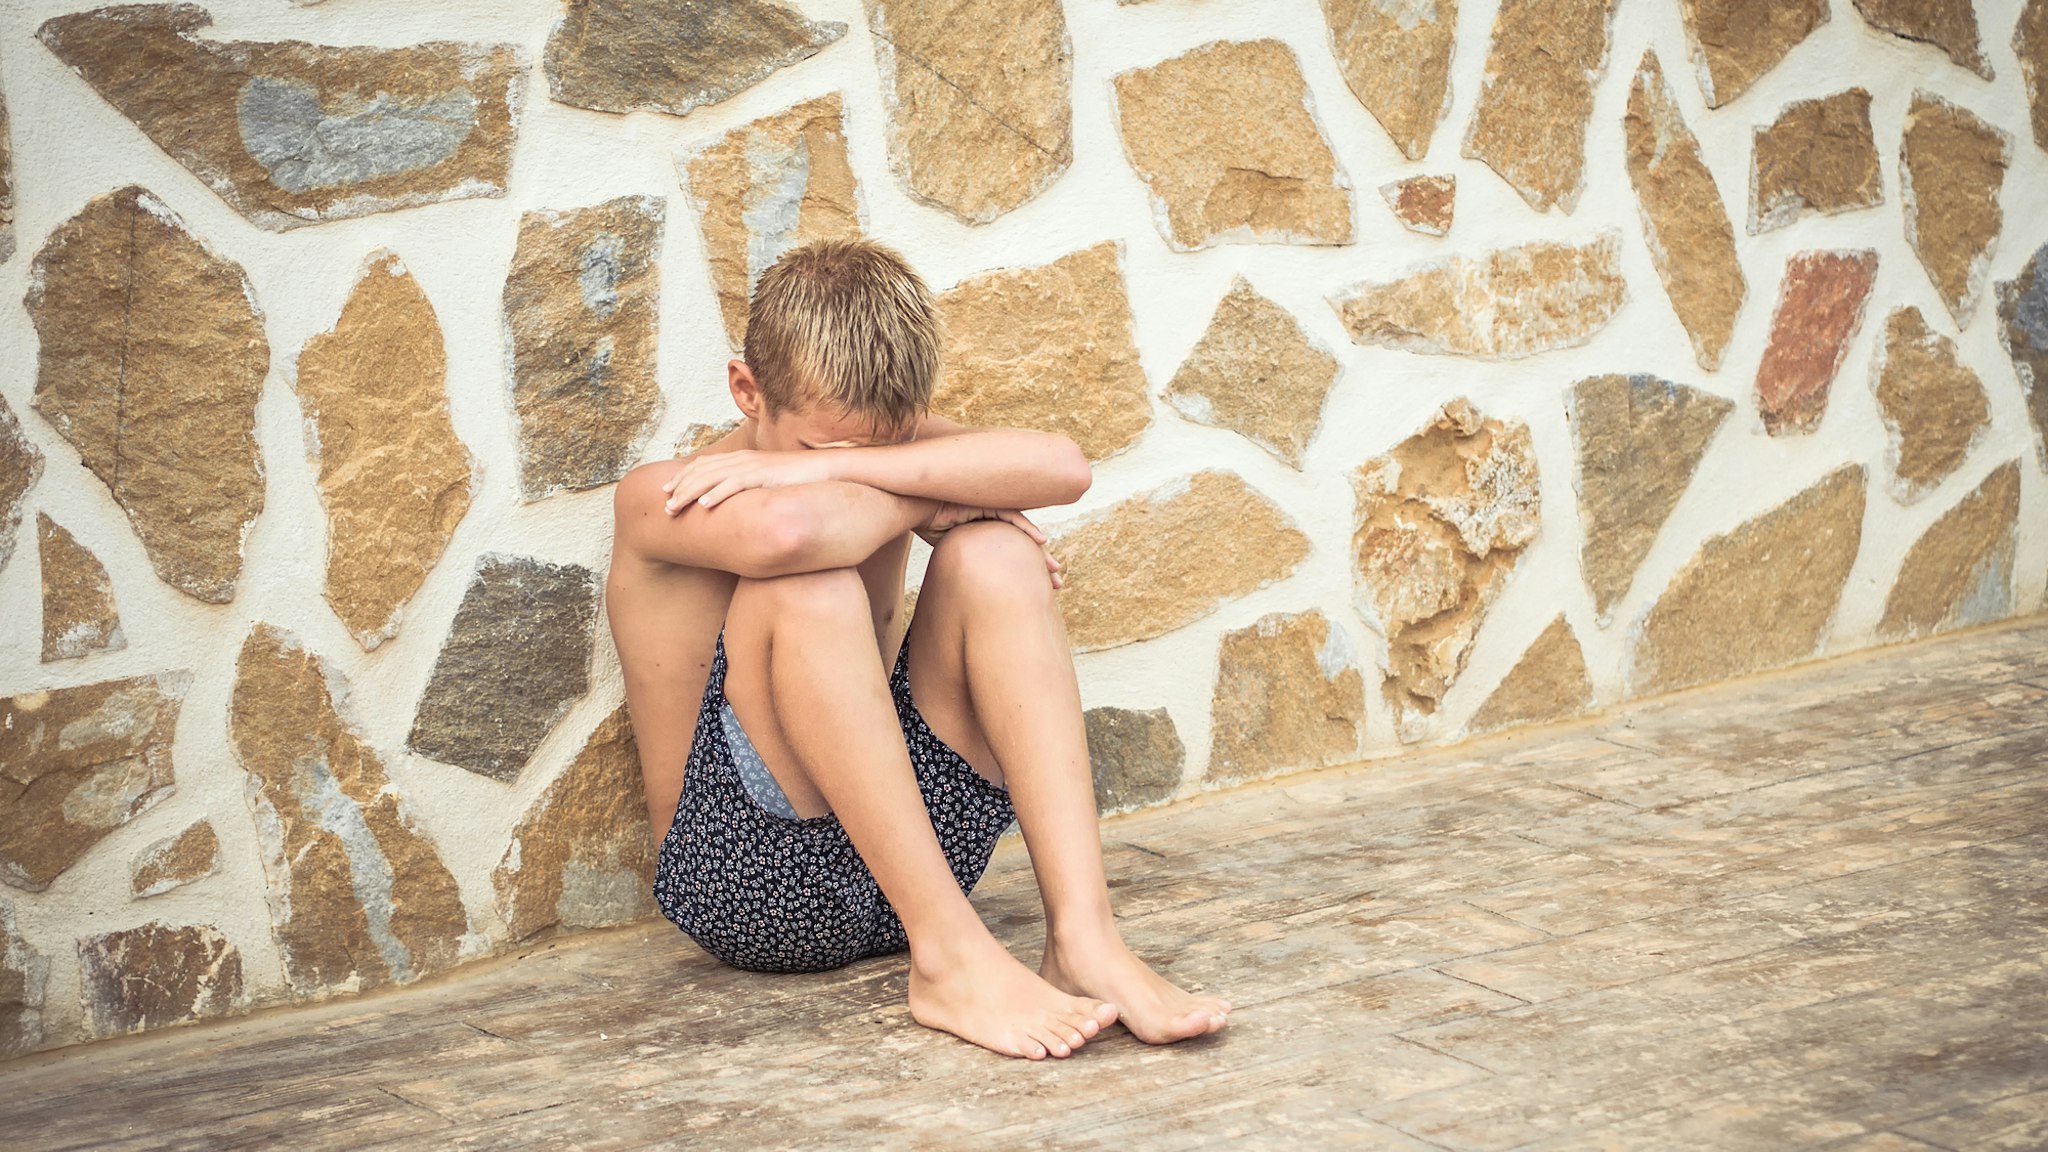 Displeased teenager dressed in swimsuit crouching against the wall and hiding his head.